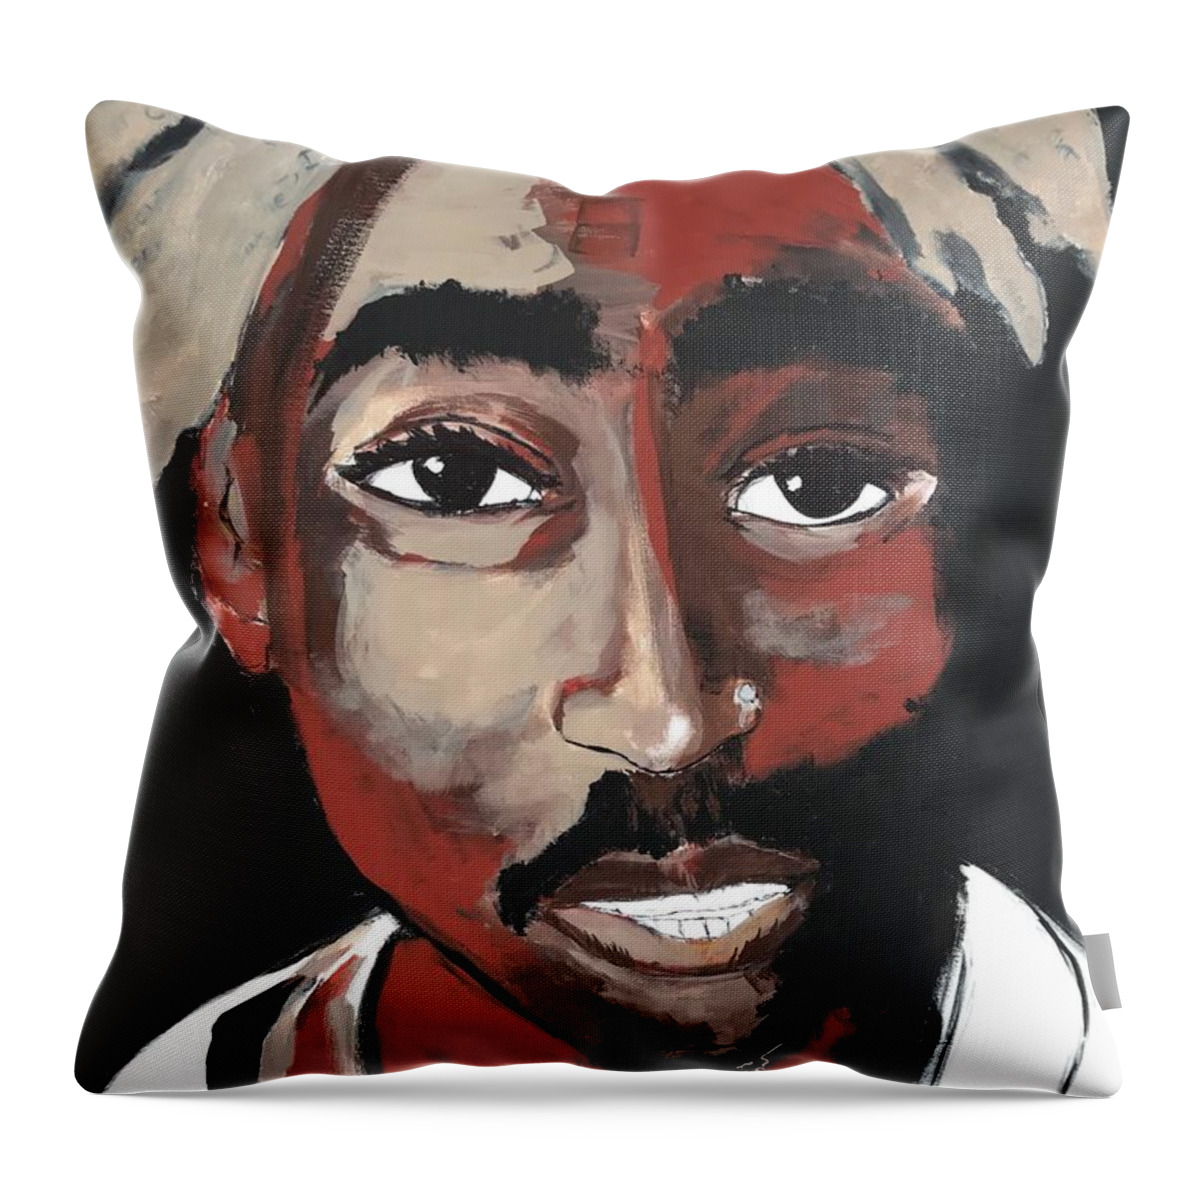  Throw Pillow featuring the painting Pac by Angie ONeal